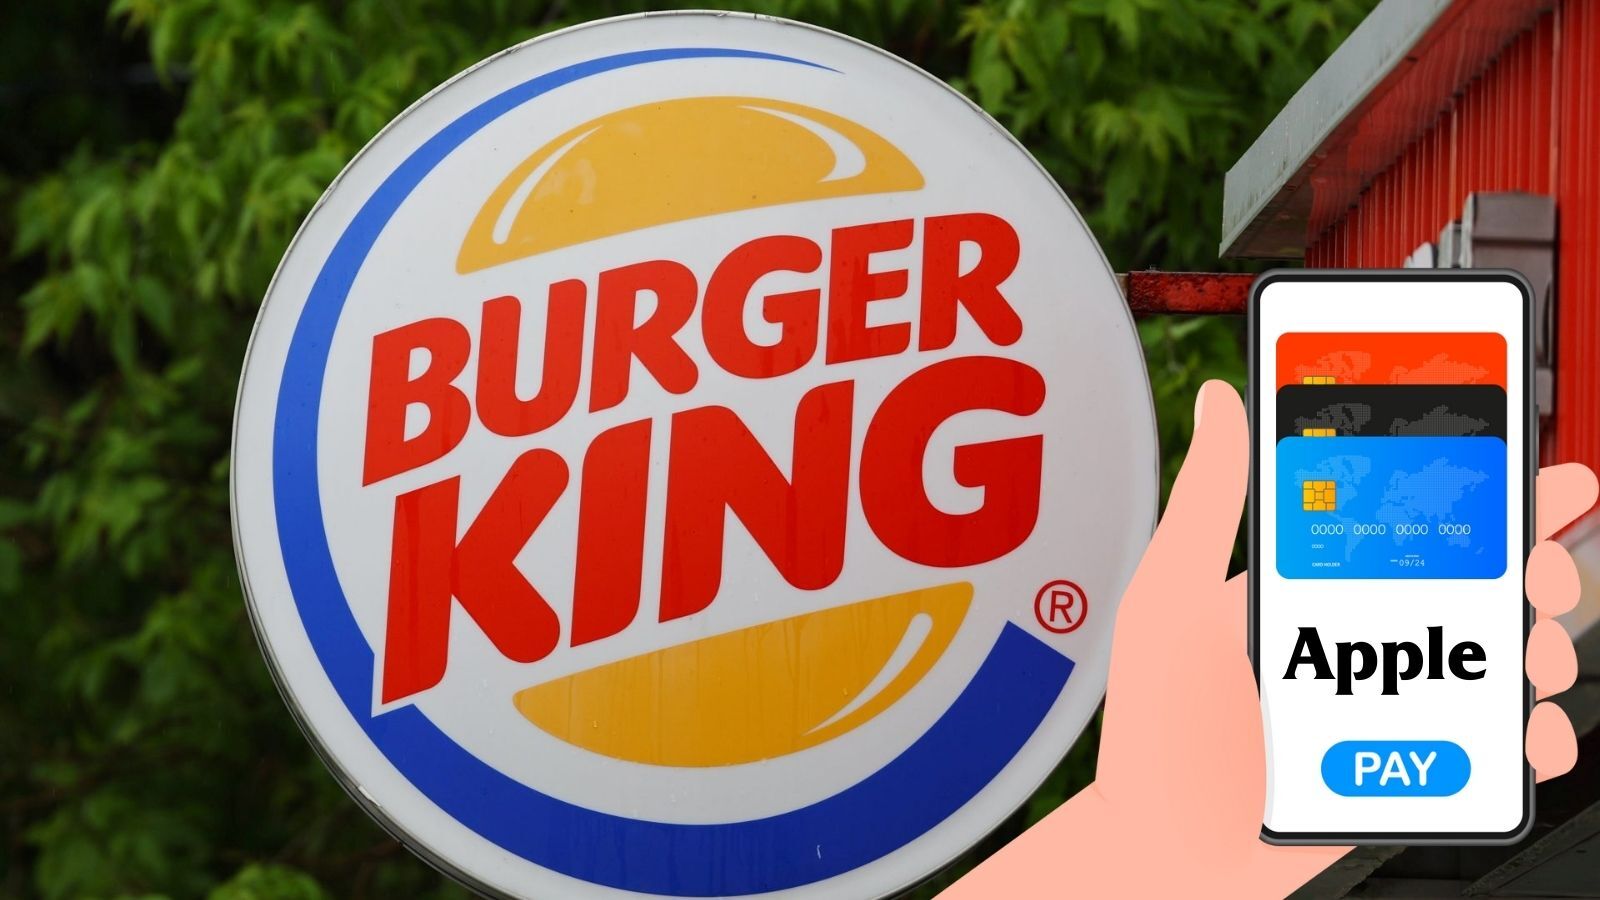 Does Burger King Take Apple Pay? (It's Not that Simple...)